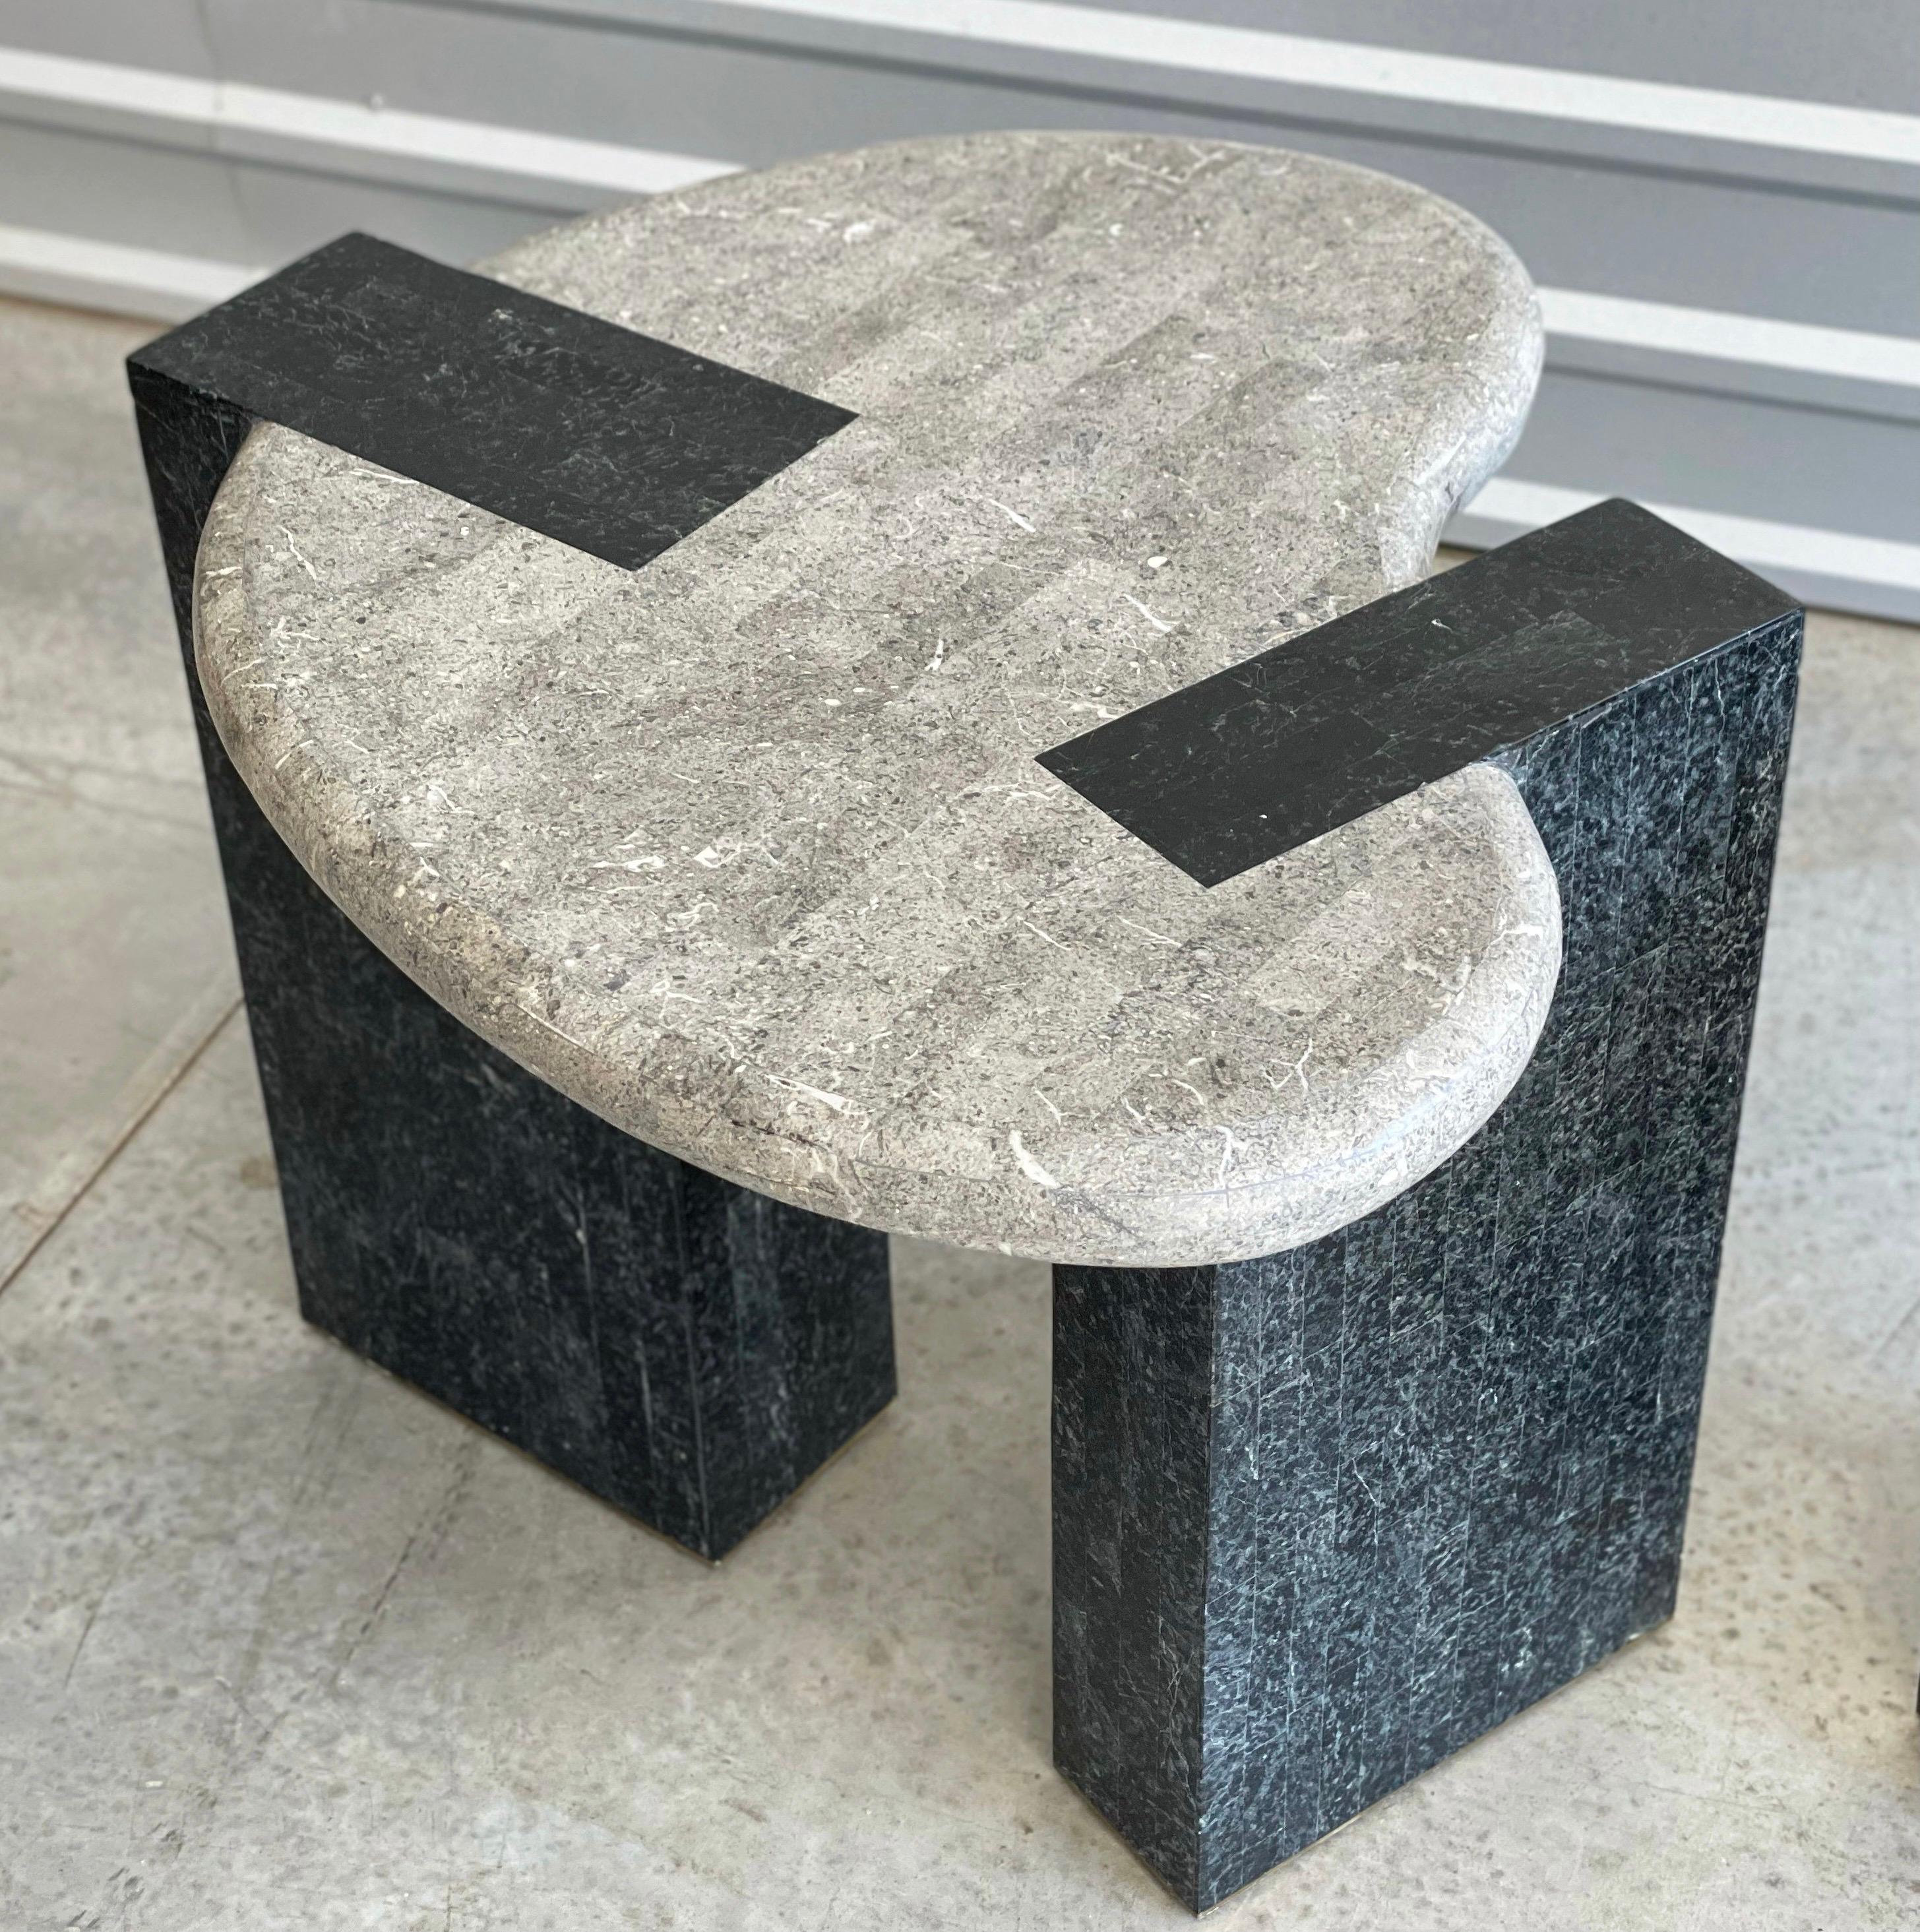 Striking pair of midcentury deco style tessellated stone side tables by Maitland-Smith. Biomorphic amoeba kidney shaped tops juxtaposed with rigid angular rectangle legs. Shades of gray and black throughout. Excellent unaltered condition.
Each